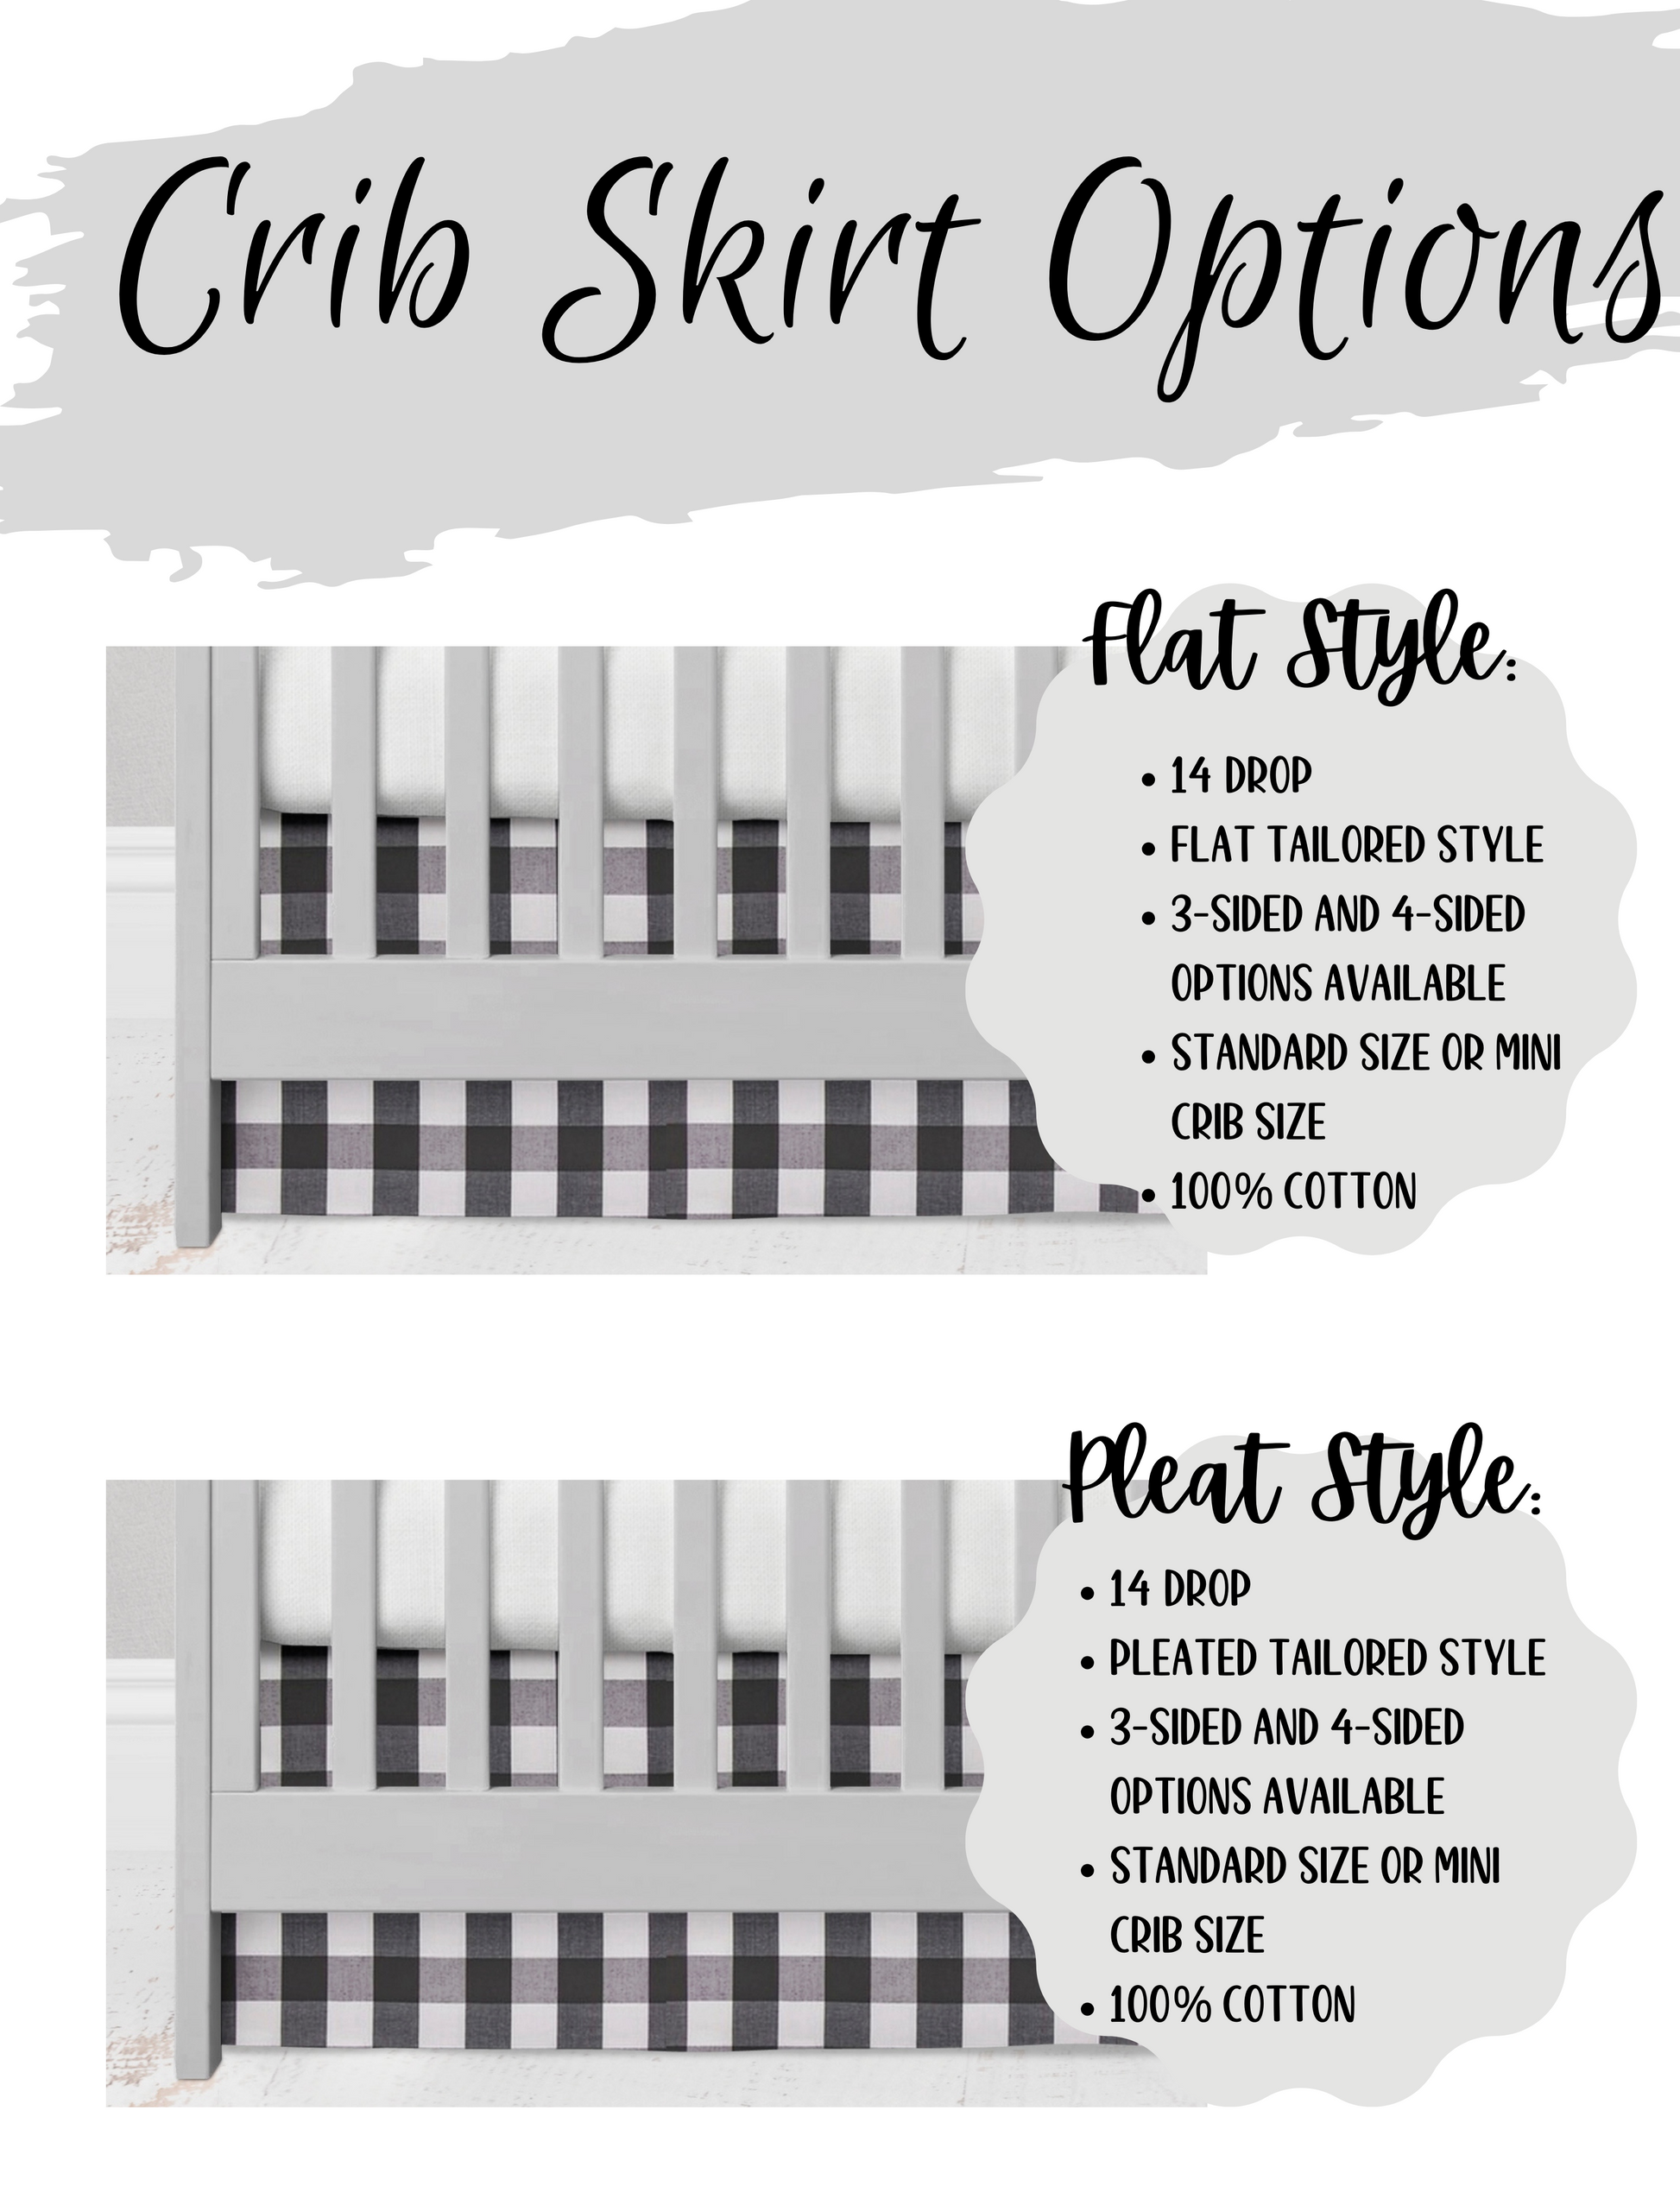 crib skirt options - available in 3-sided & 4-sided with the flat style. Other styles and sizes upon request